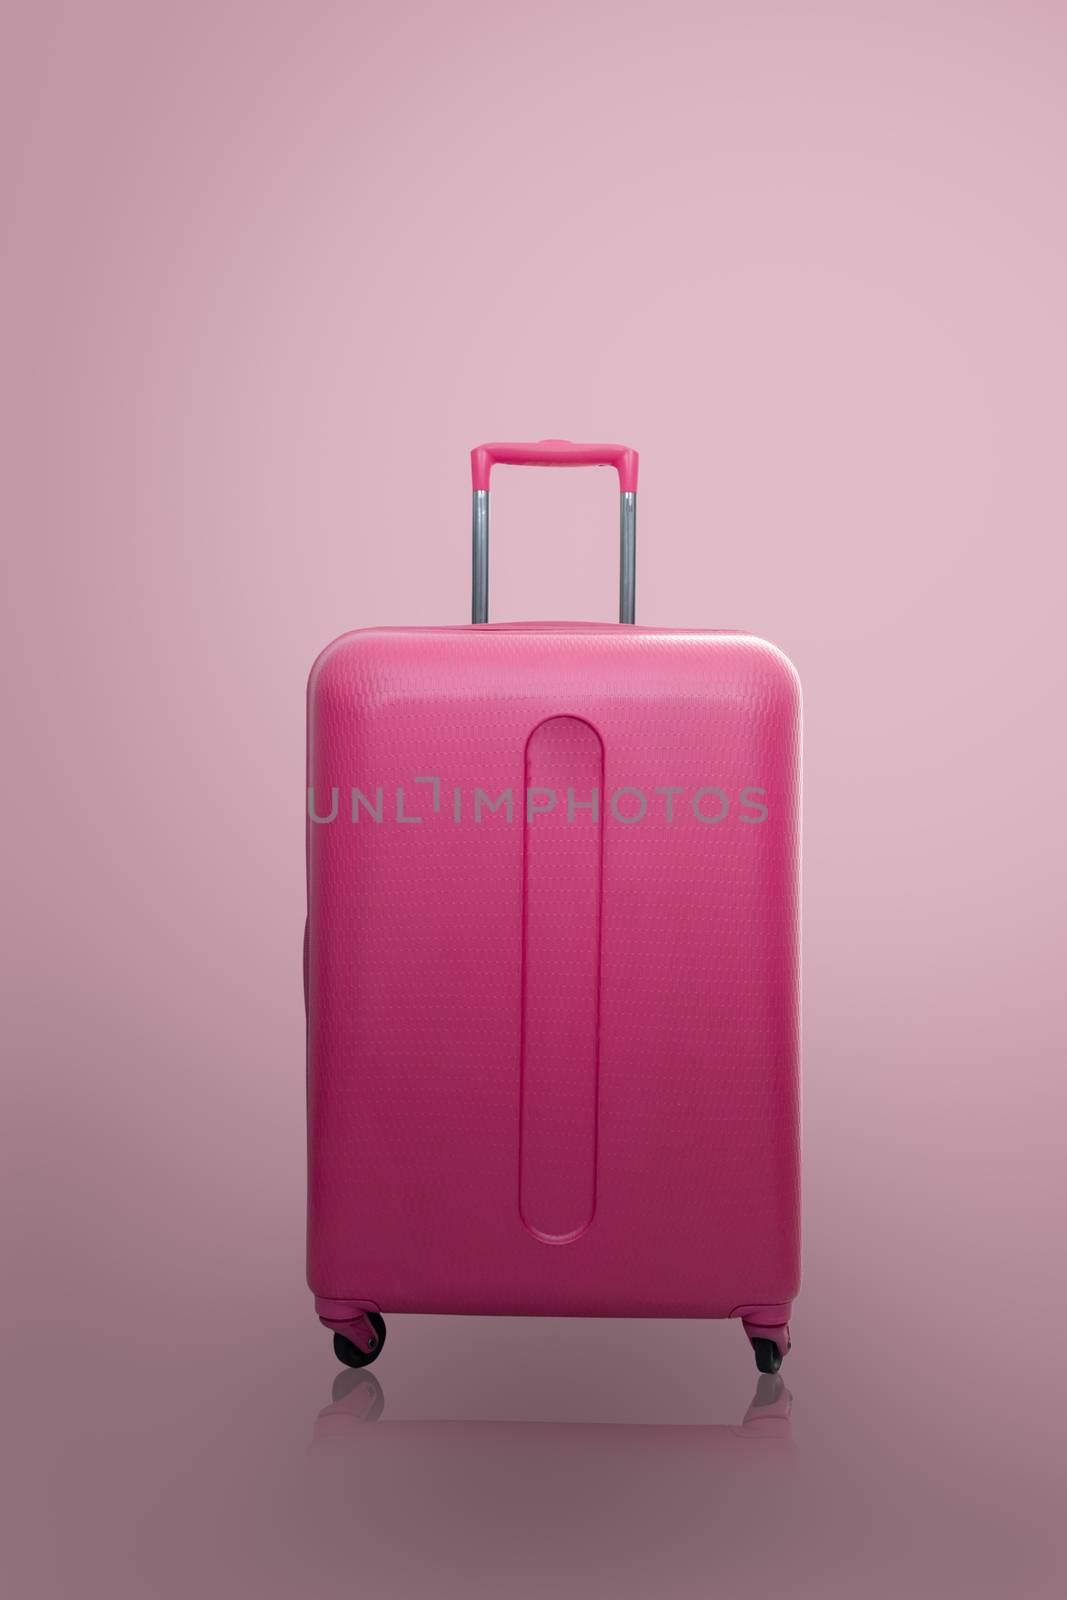 Traveler pink suitcase or cabin size luggage on pink background with shadow, Journey and travel concept.